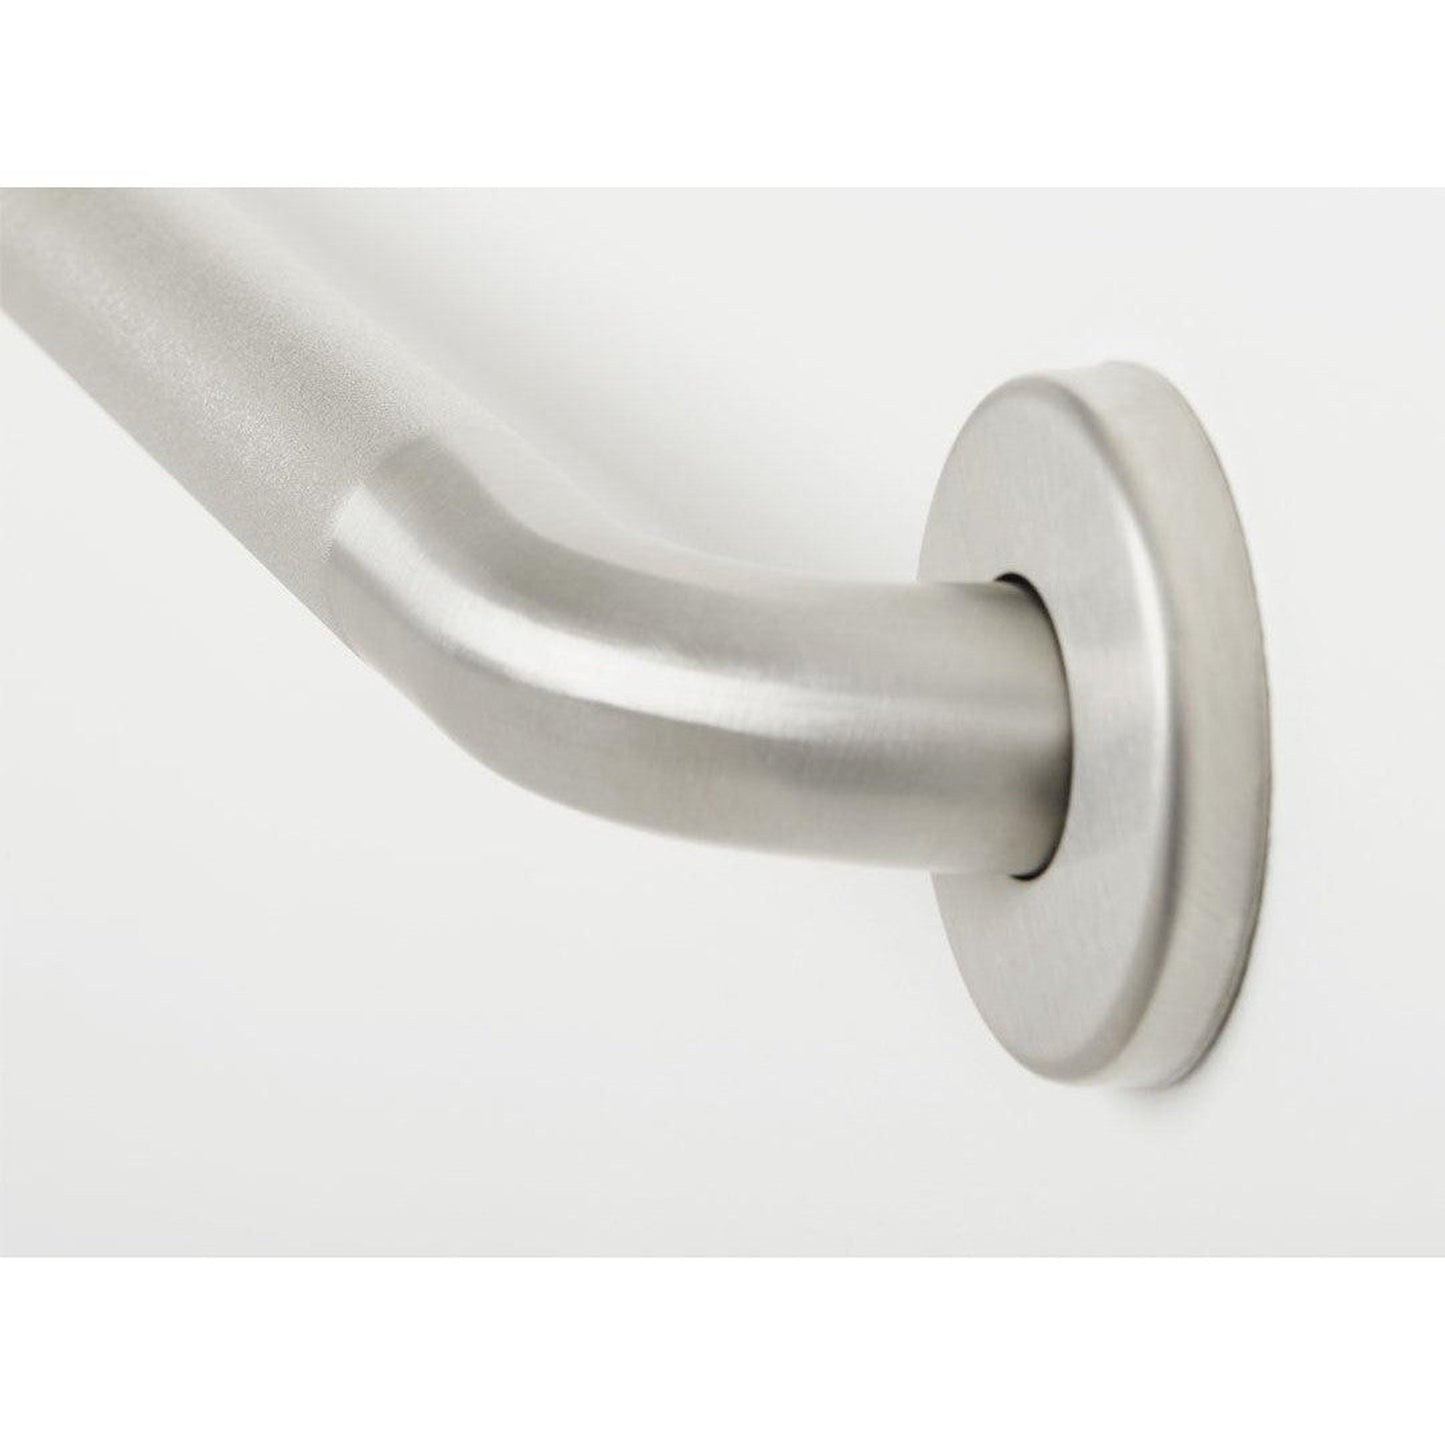 Seachrome Signature Series Value Line 48" Peened Stainless Steel With Satin Ends 1.5" Tube Diameter Straight Concealed Flange Grab Bar